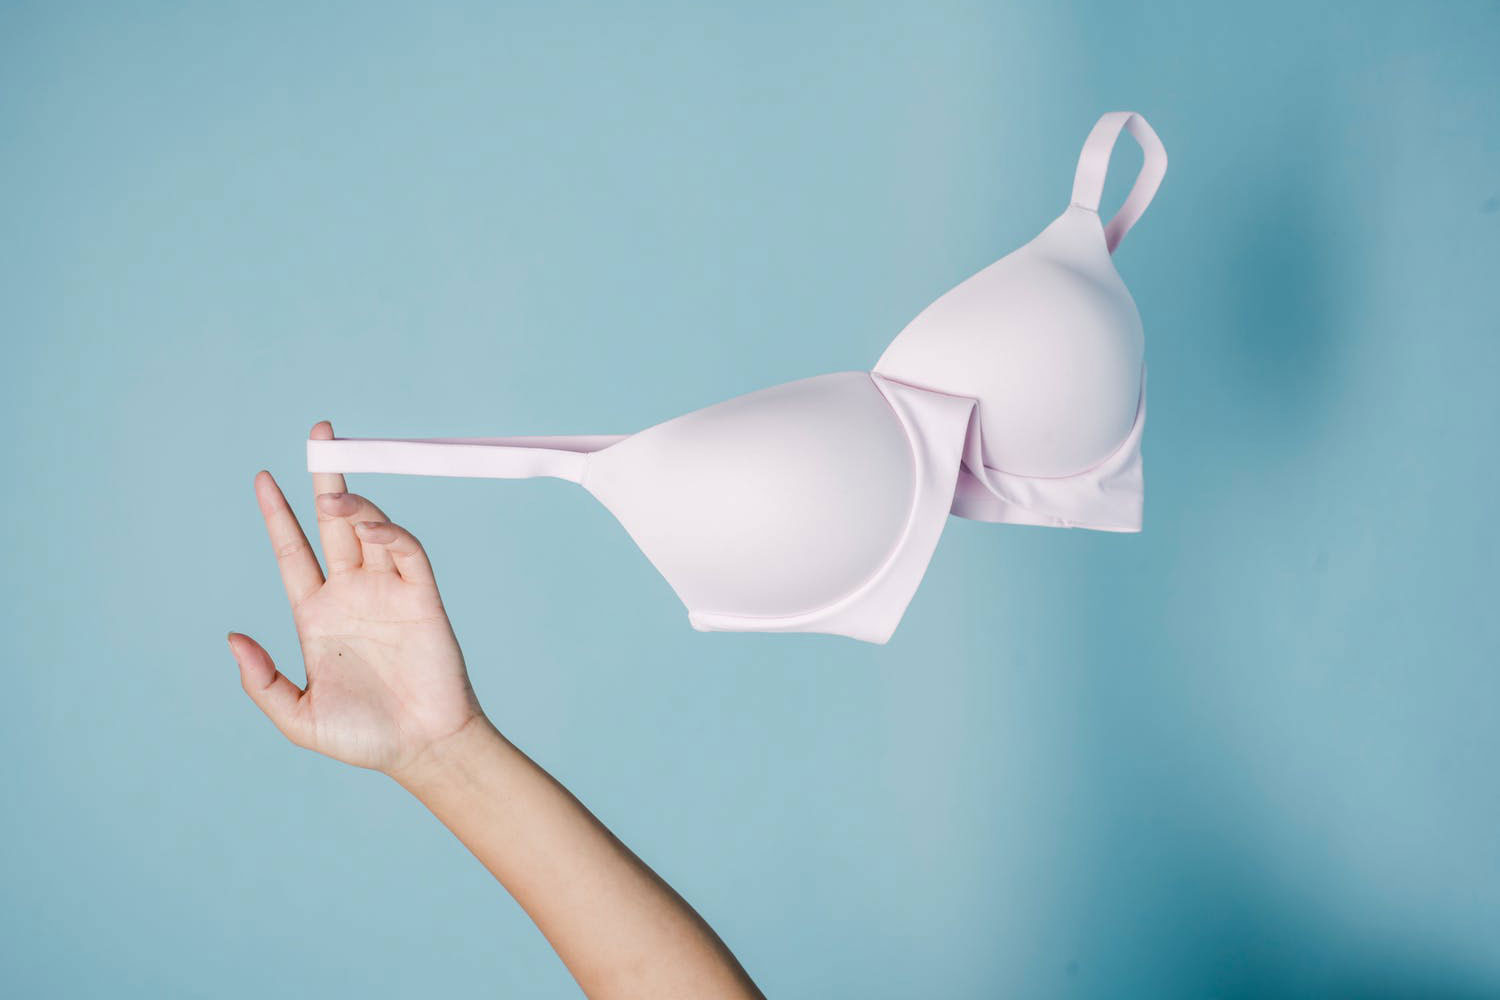 Bras For After Surgery  Breast Cancer Awareness Month – The Able